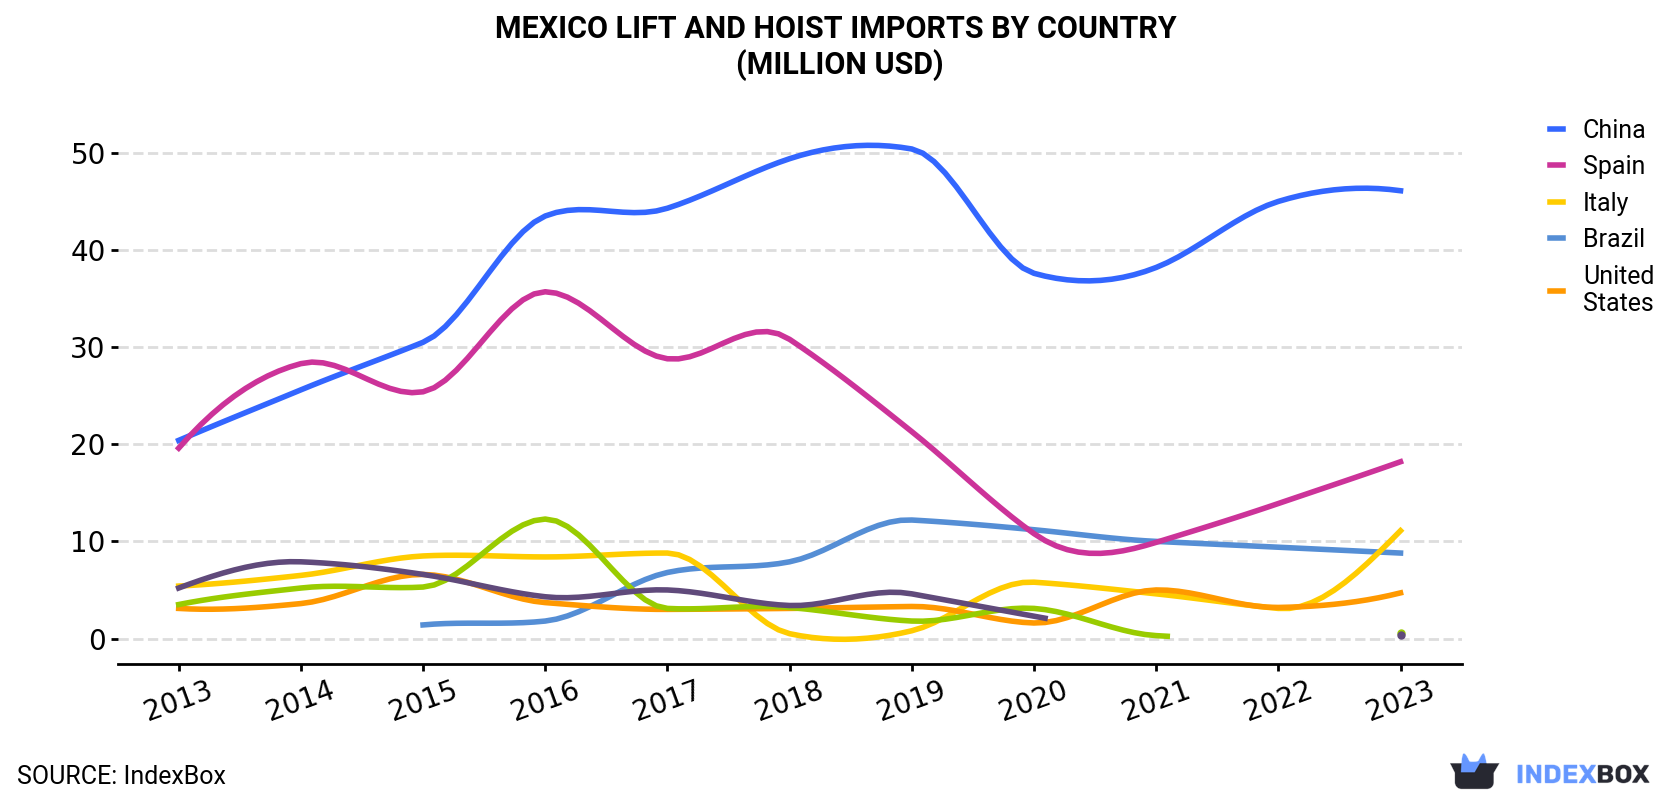 Mexico Lift And Hoist Imports By Country (Million USD)